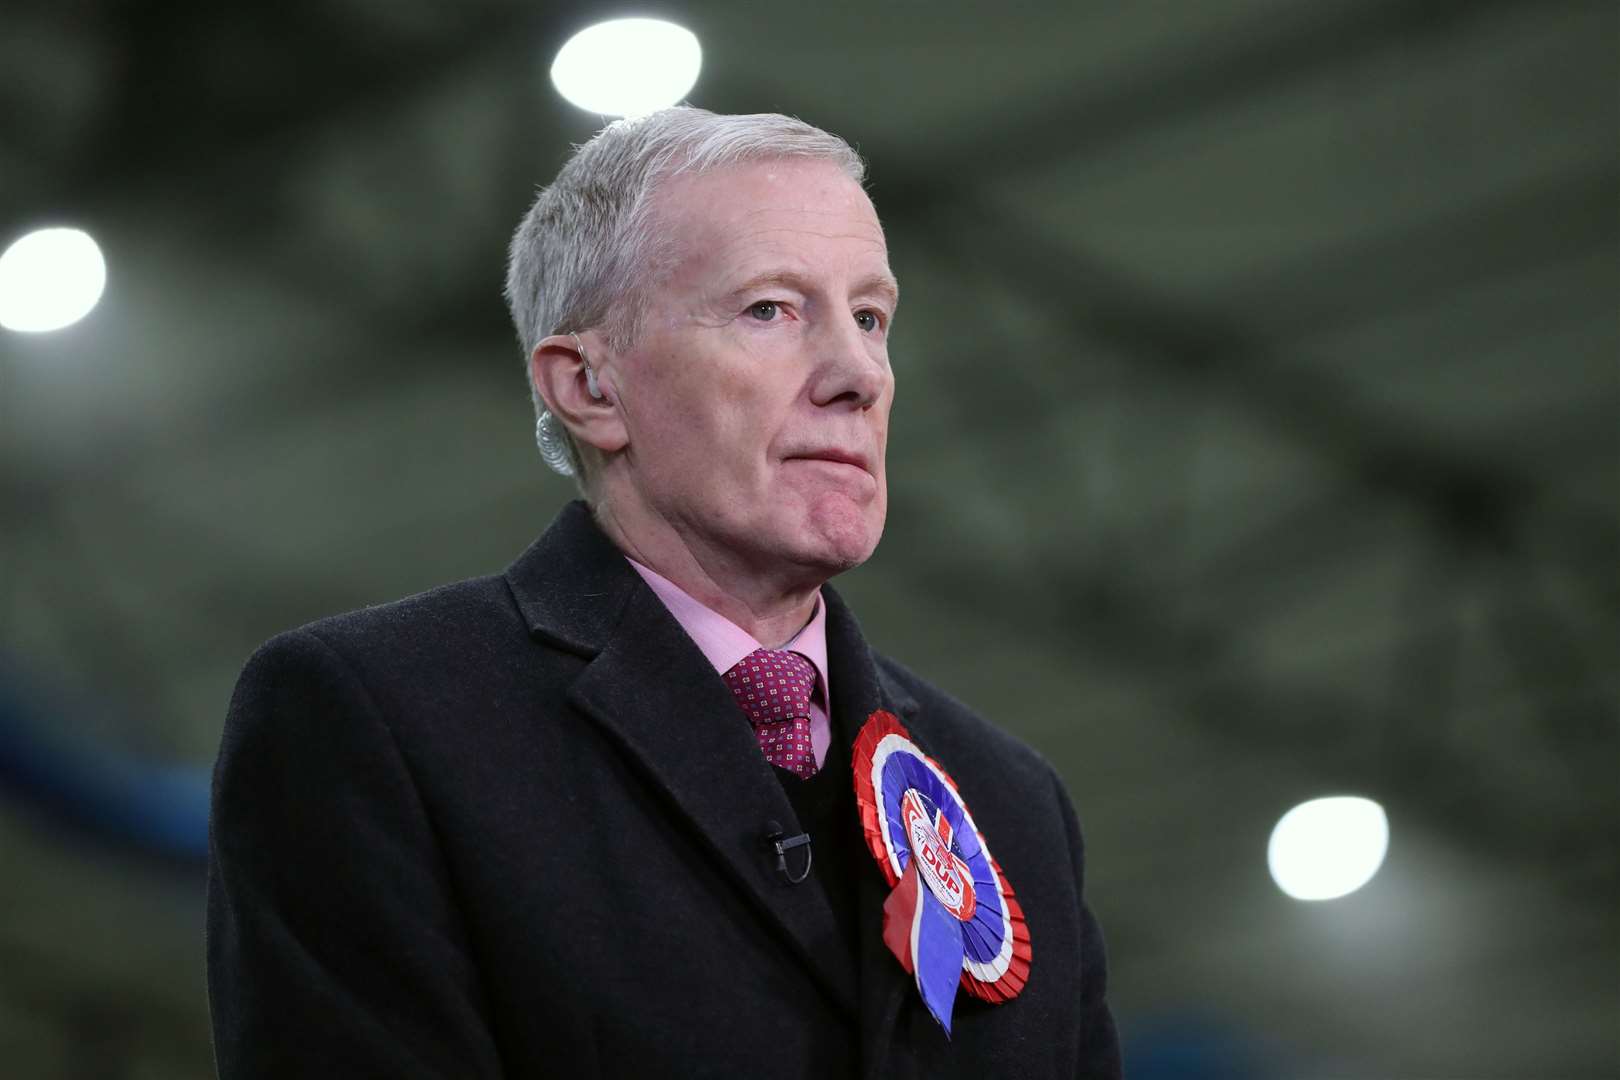 DUP East Londonderry Gregory Campbell said he hoped the President’s visit would not used for political ends (Liam McBurney/PA)